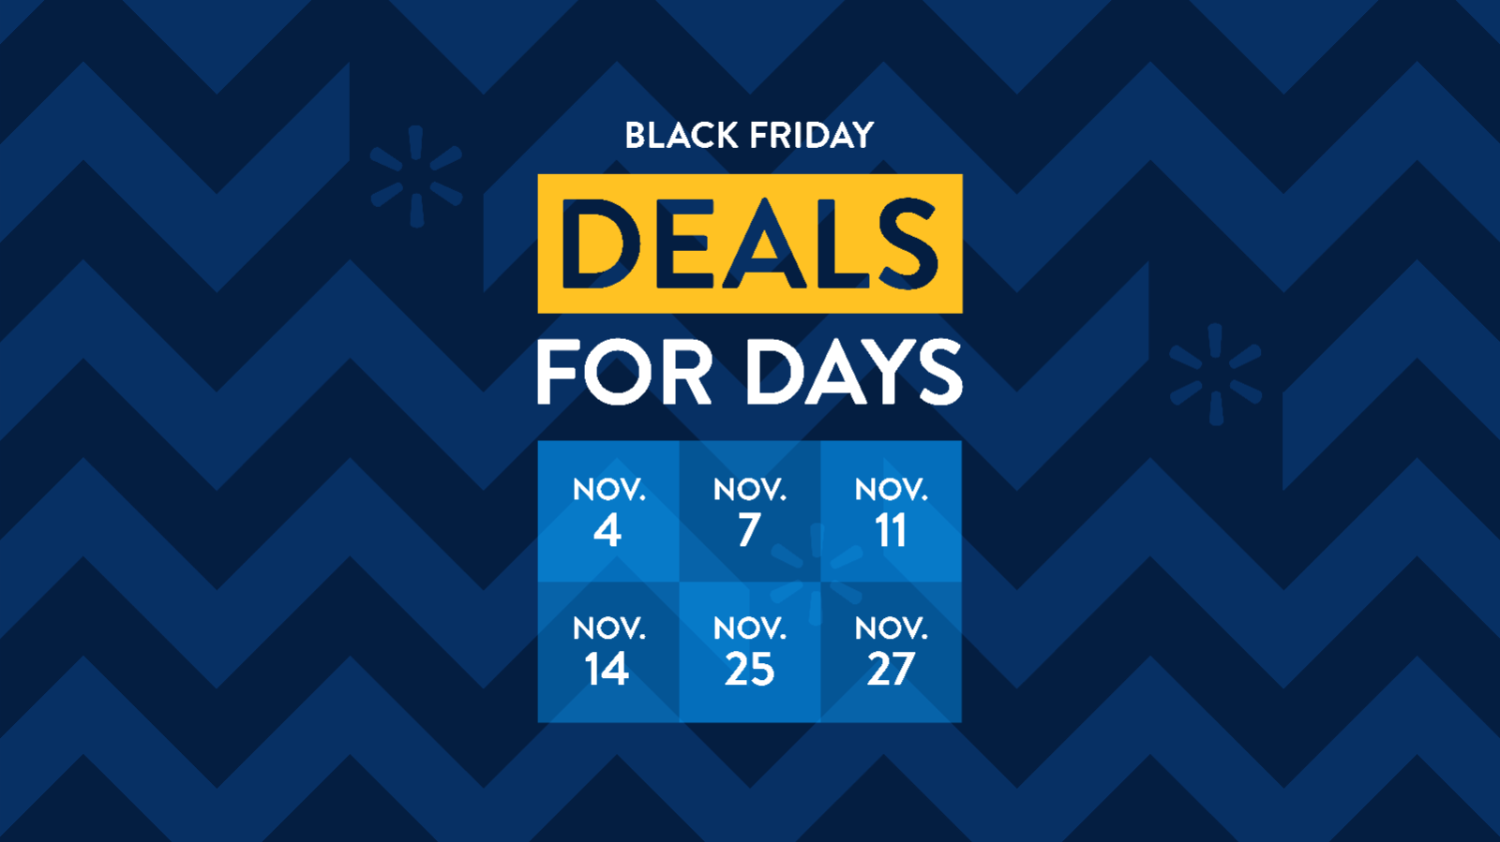 https://corporate.walmart.com/content/corporate/en_us/news/2020/10/14/walmart-announces-black-friday-deals-for-days-a-reinvented-black-friday-shopping-experience/jcr:content/corpnewspar/image_18.img.png/1693432647651.png